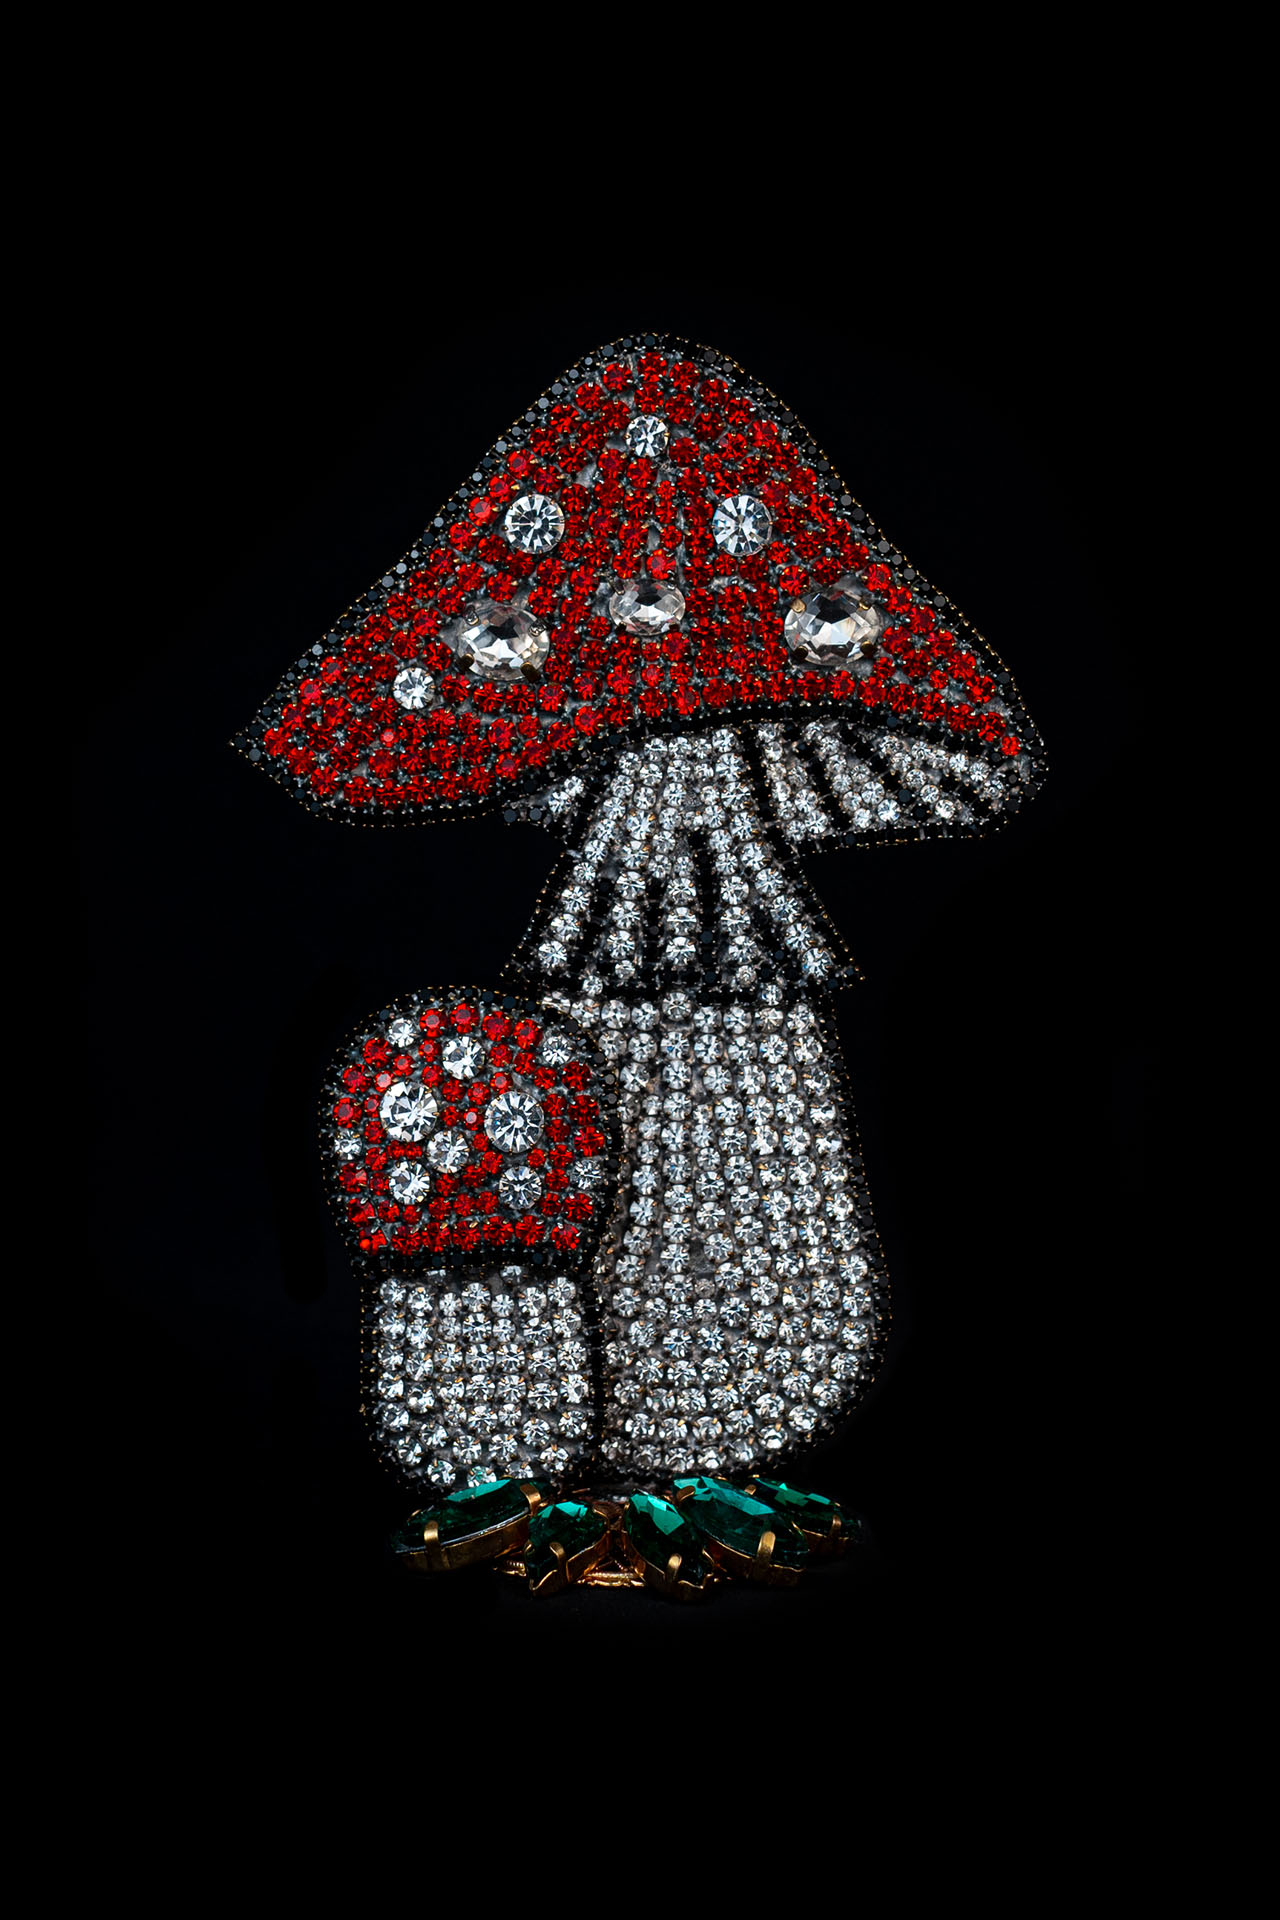 A  toadstools decorations made from red and white rhinestones.